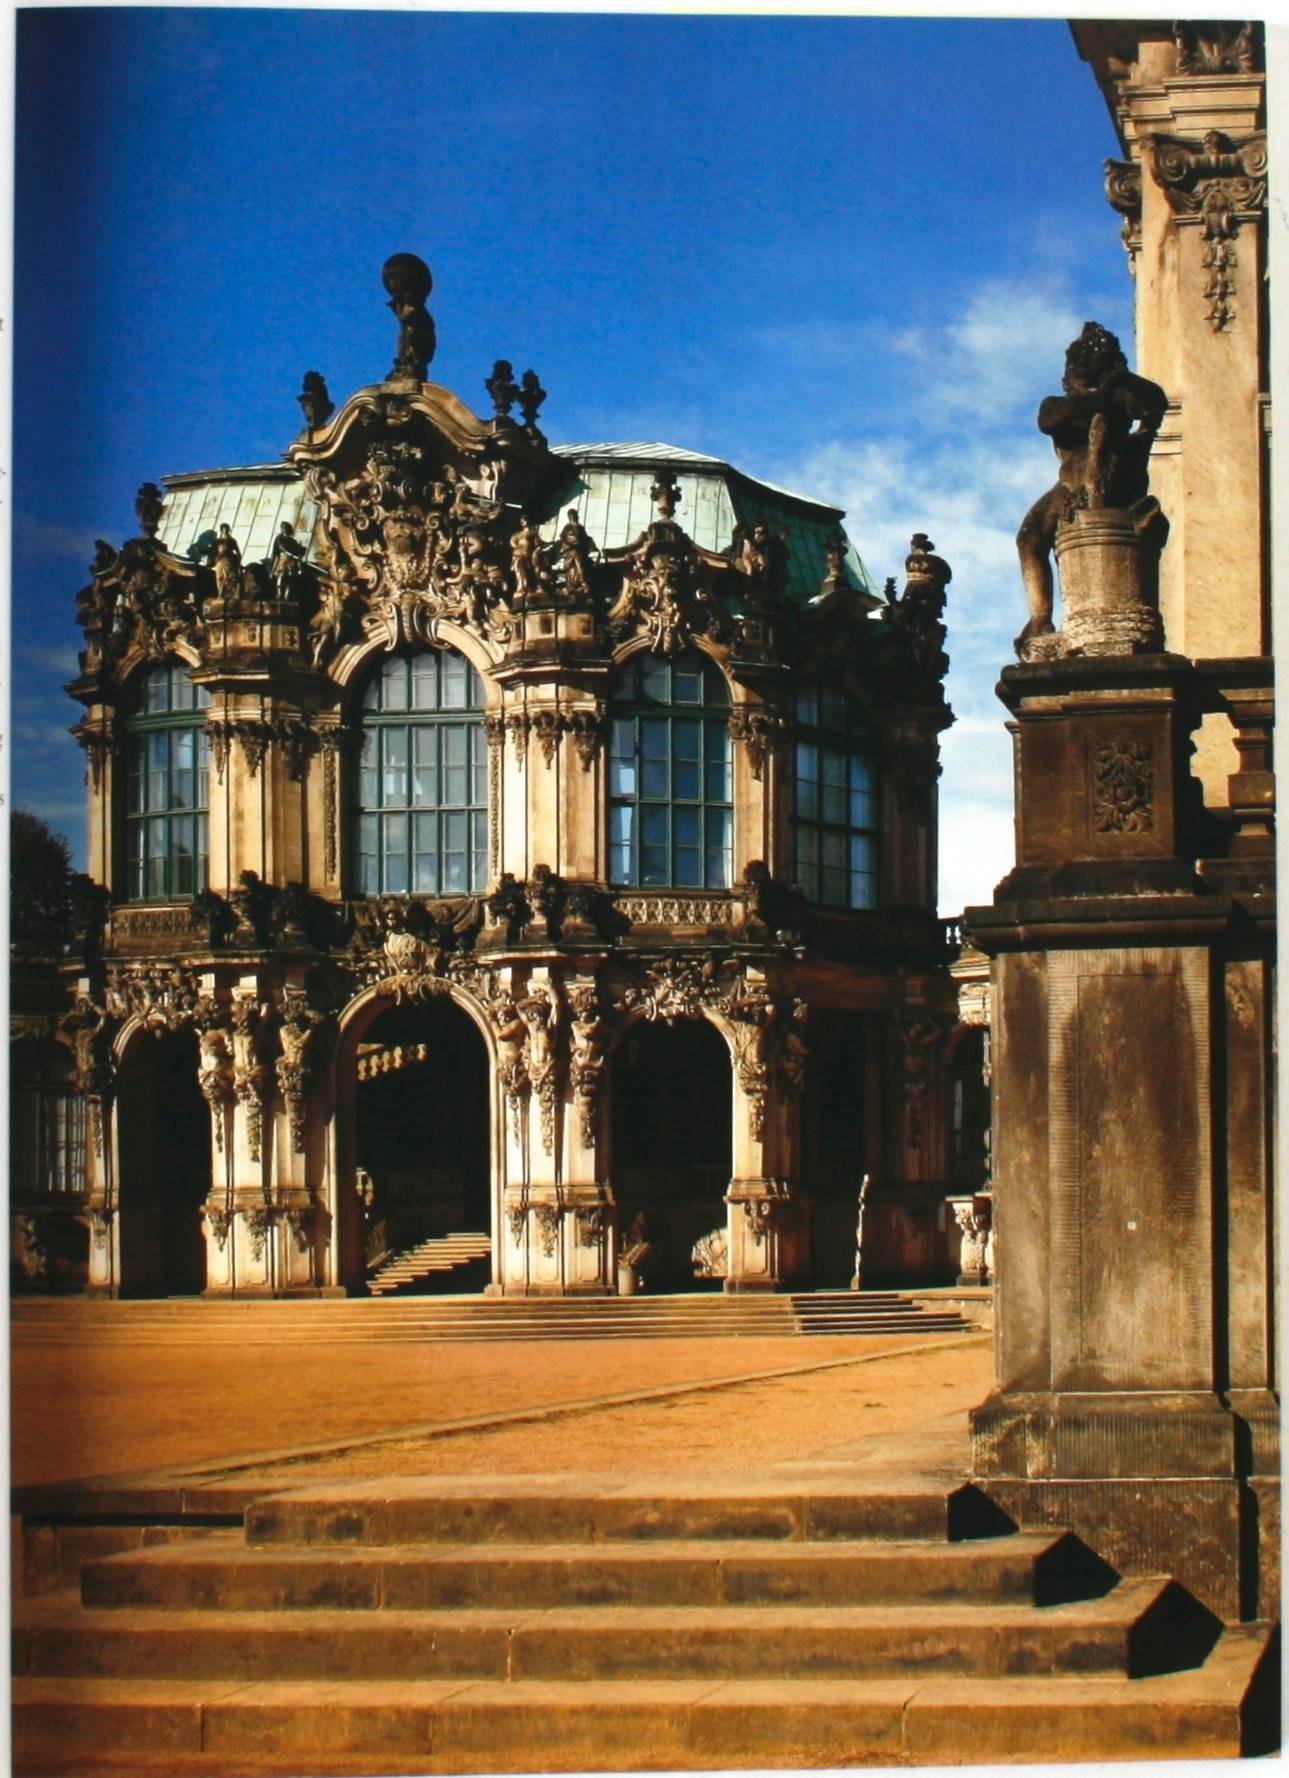 The Glory of Baroque Dresden. The State Art Collections Dresden. The Mississippi Commission for International Cultural Exchange. Mississippi Art Pavilion, 2004. First edition hardcover with dust jacket. The book consists of more than 400 works from